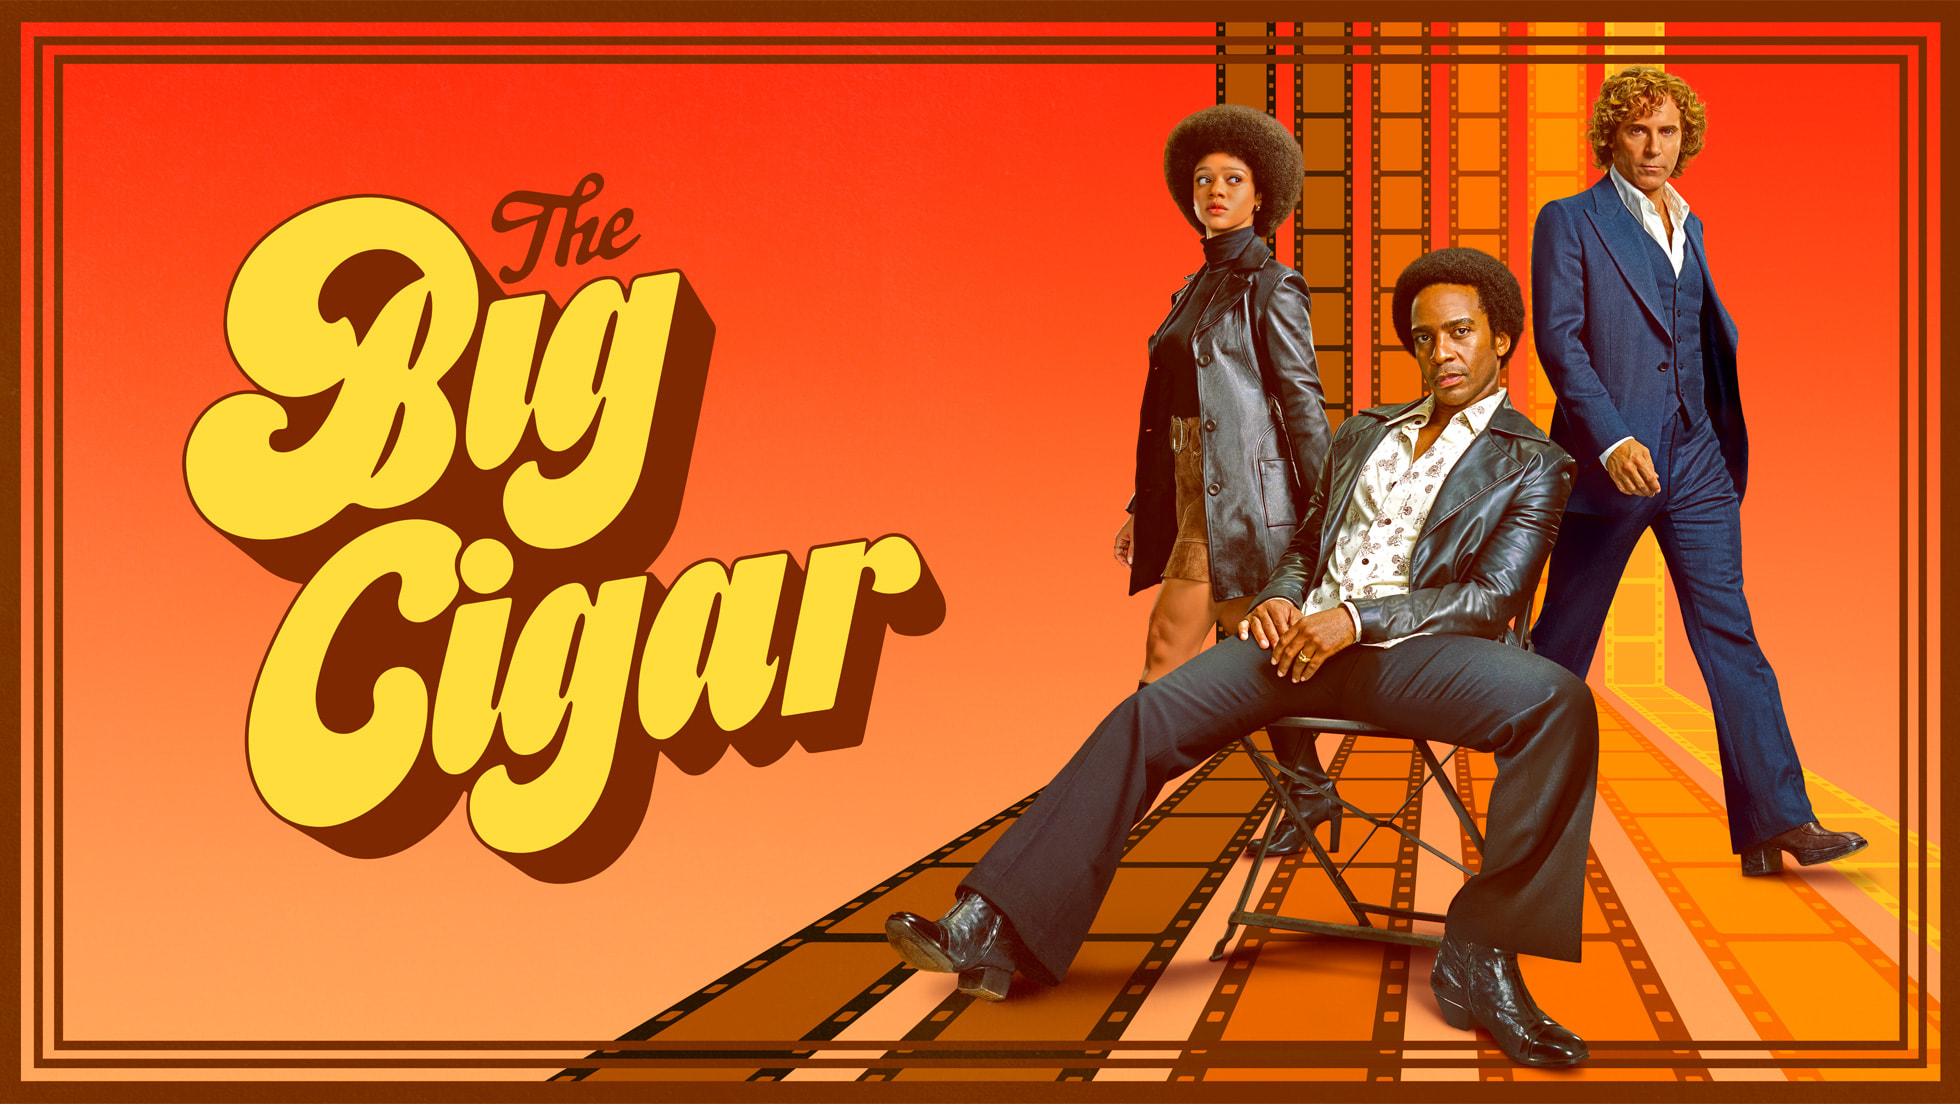 Apple TV+ debuts trailer for “The Big Cigar,” new limited series